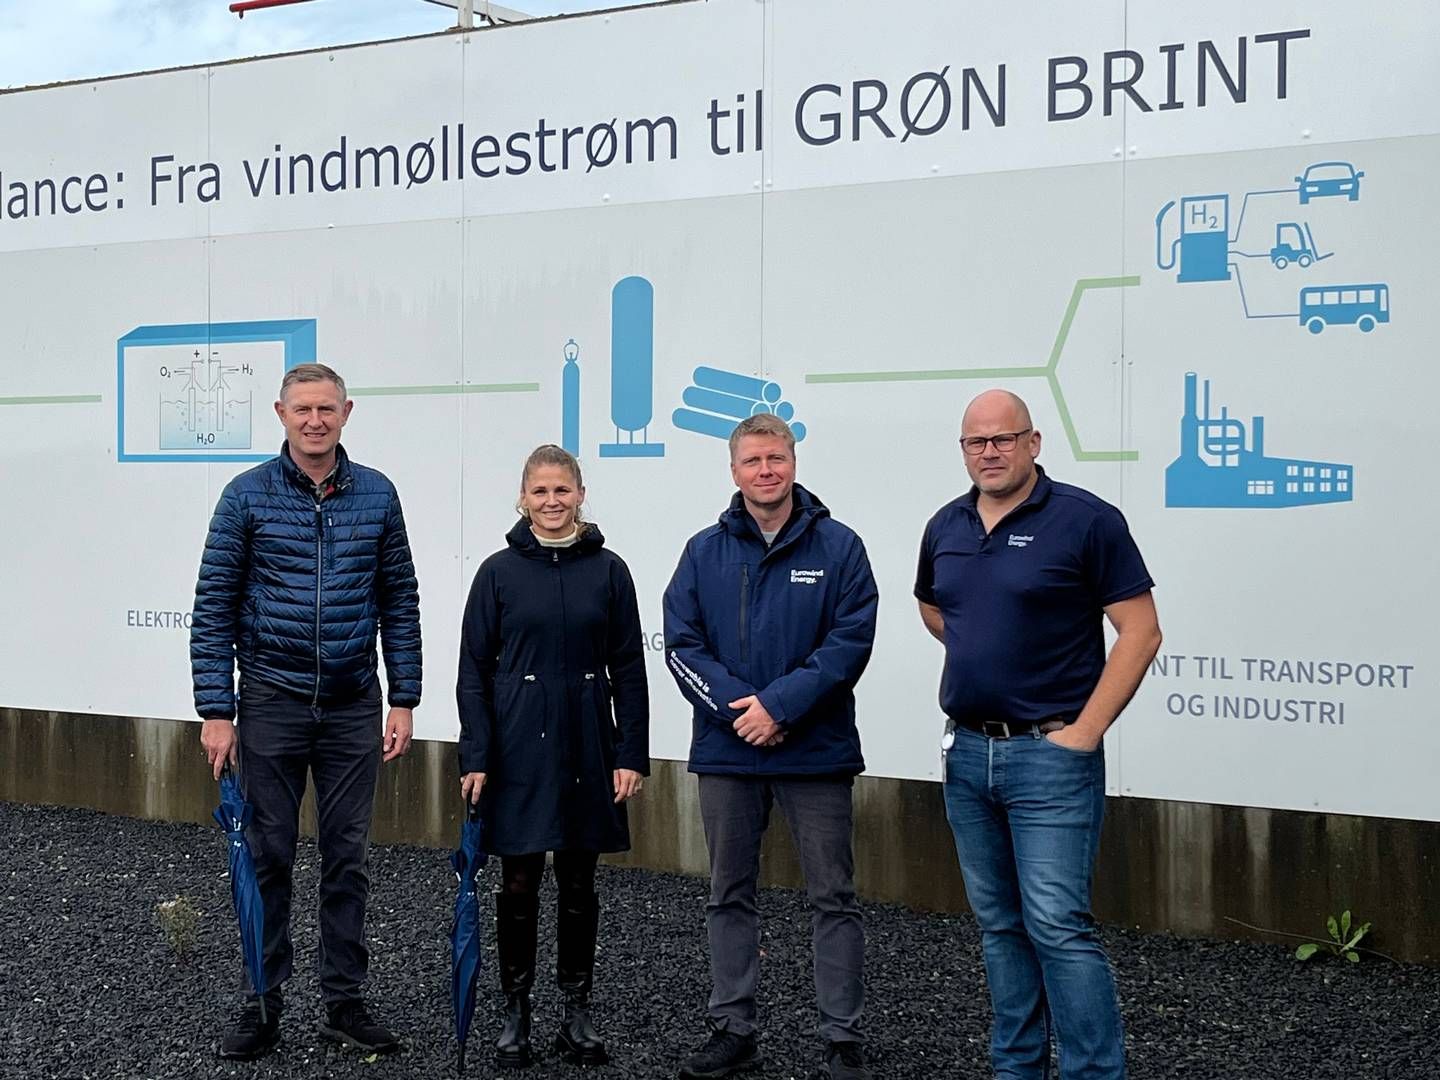 From left to right: Eurowind CEO Jens Rasmussen together with people from the company's Special Task Unit, which will be responsible for the new facility. | Foto: Eurowind Pr